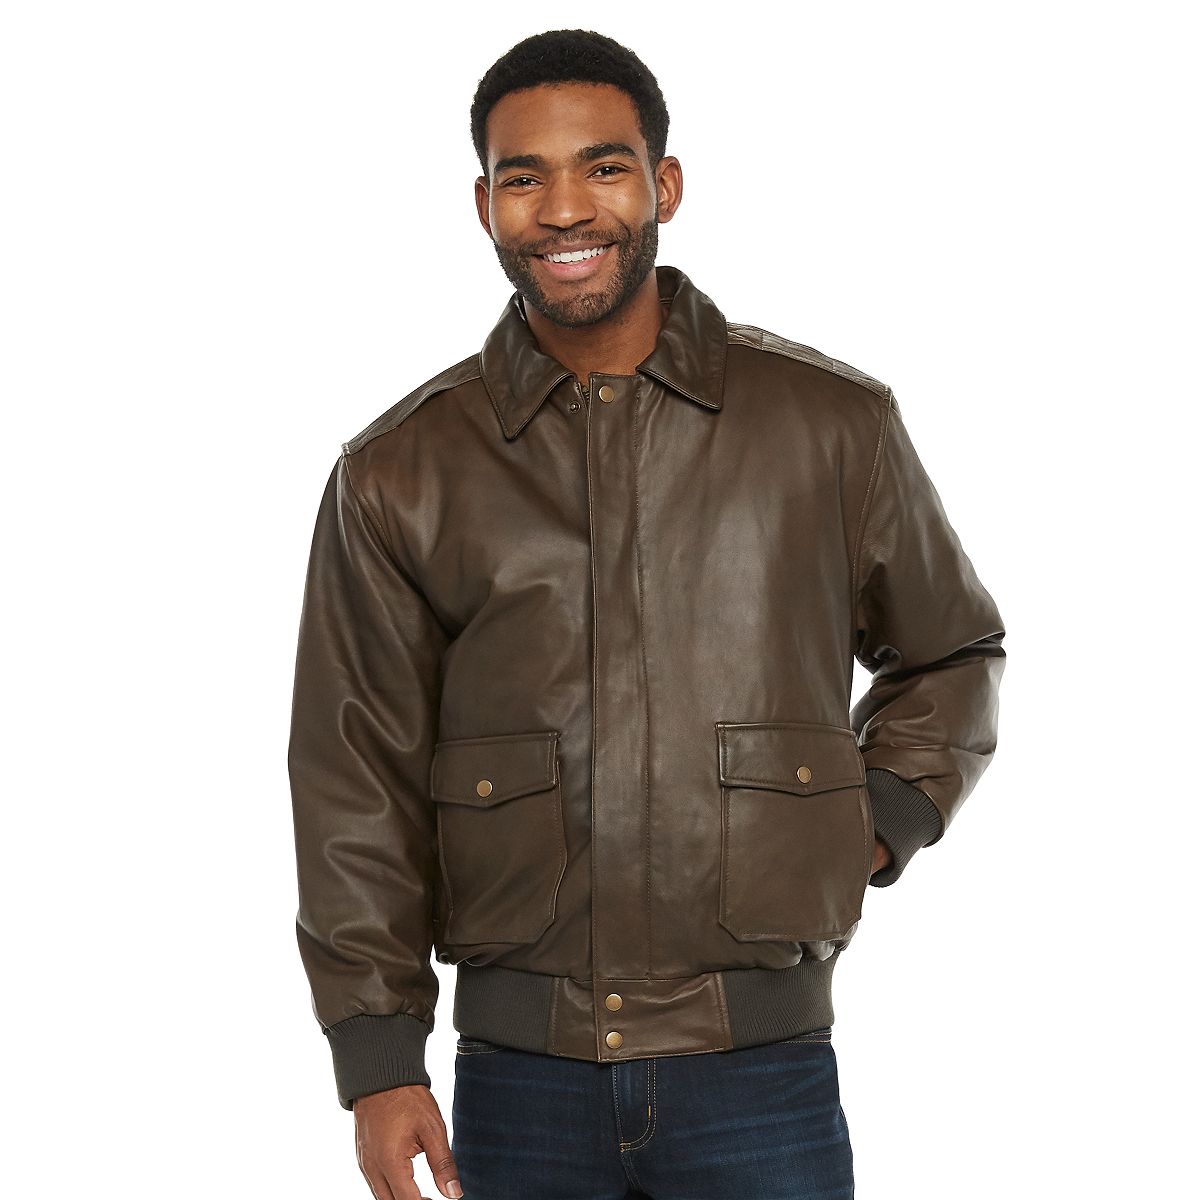 The Ultimate A to Z of Leather Jacket Brand (2022 updated) – PalaLeather